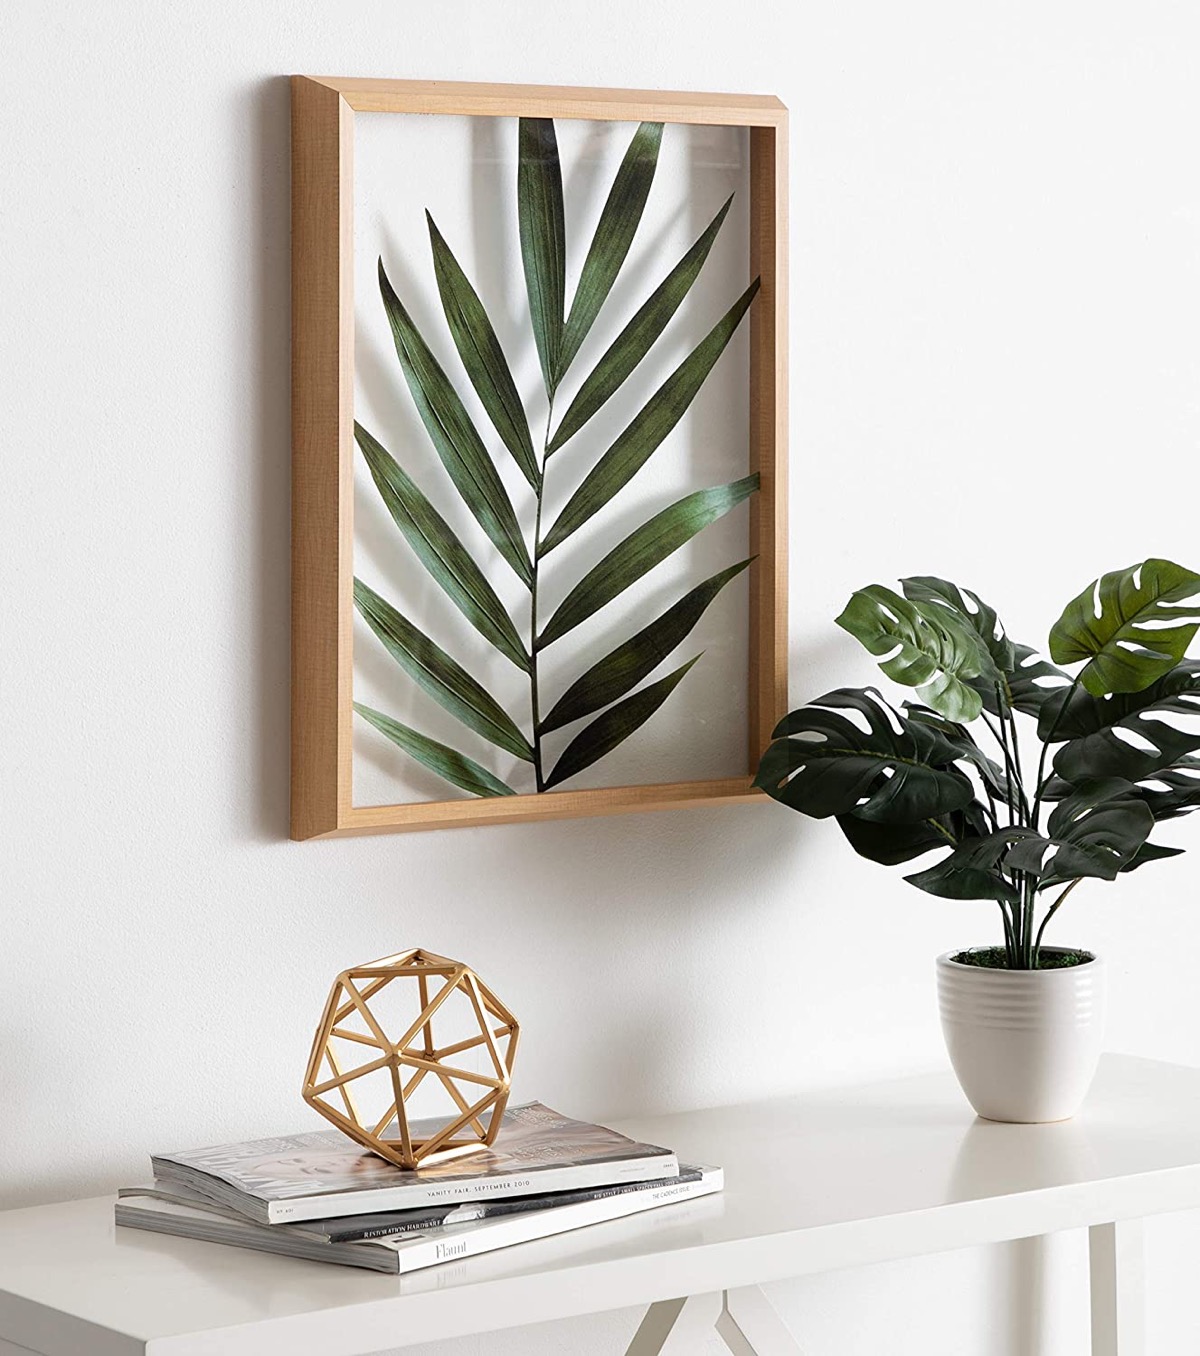 http://www.home-designing.com/product-of-the-week-framed-transparent-wall-art